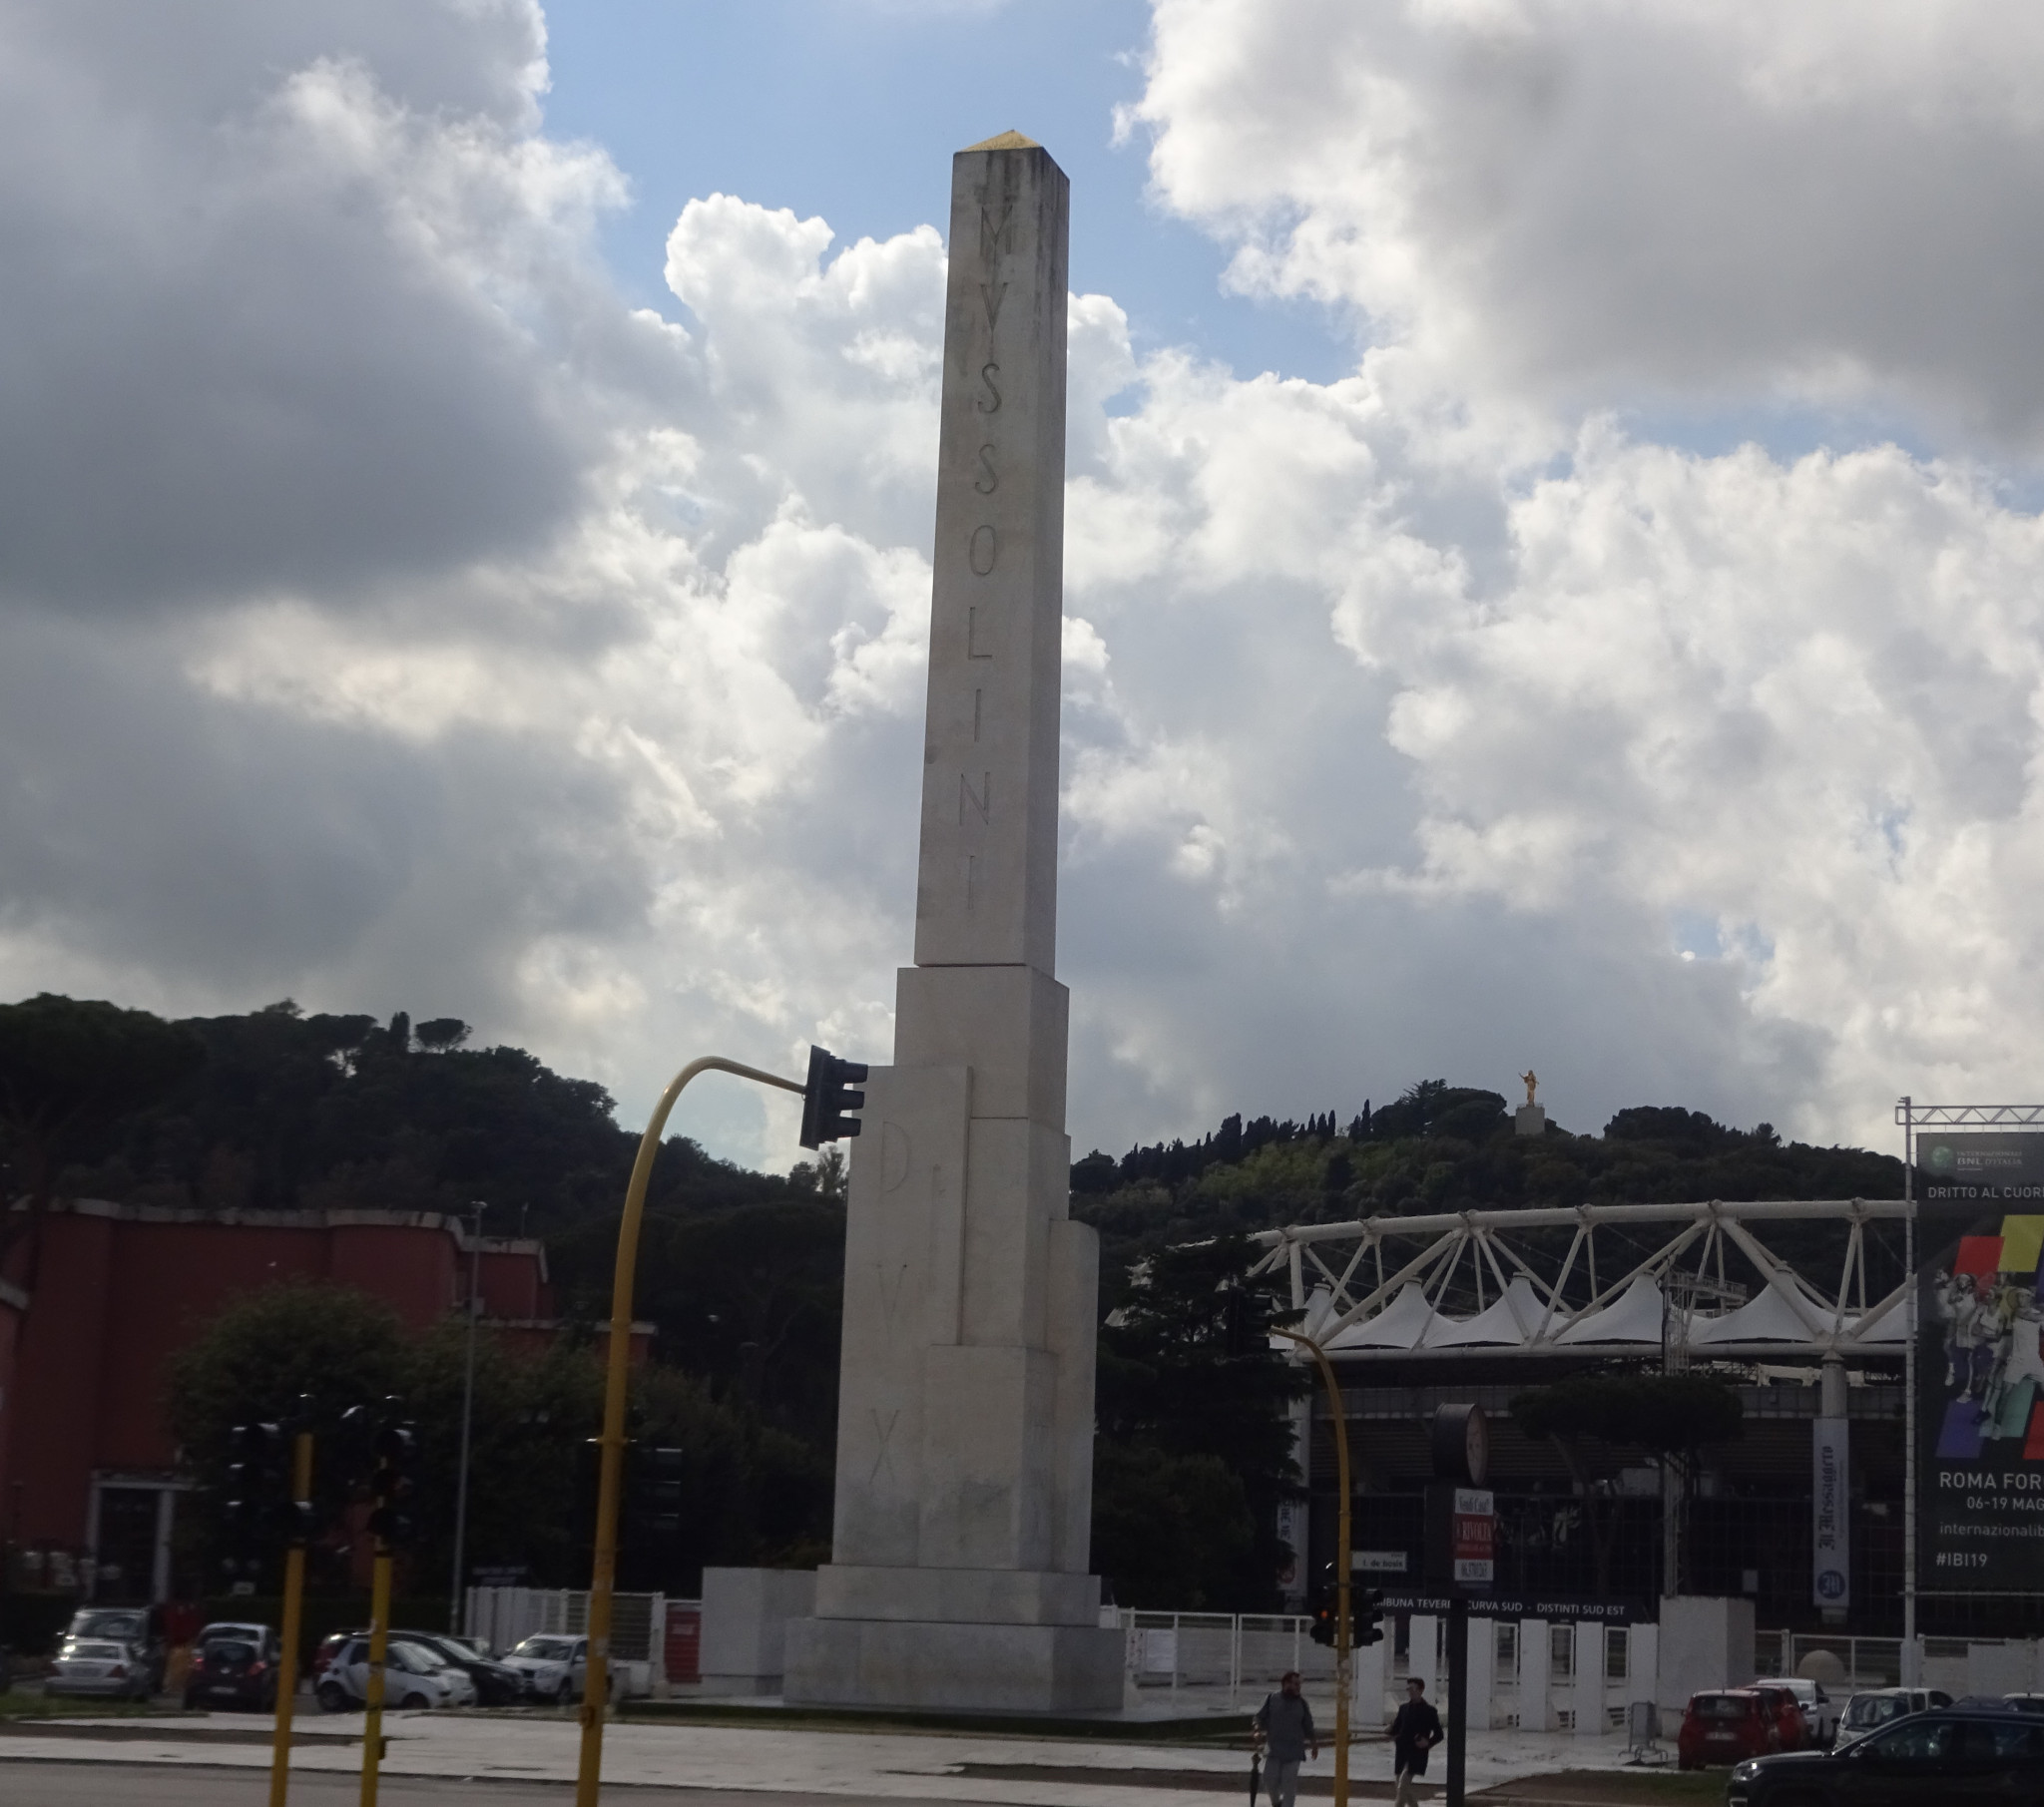 An obelisk honouring Benito Mussolini remains by the Foro Italico ©Philip Barker